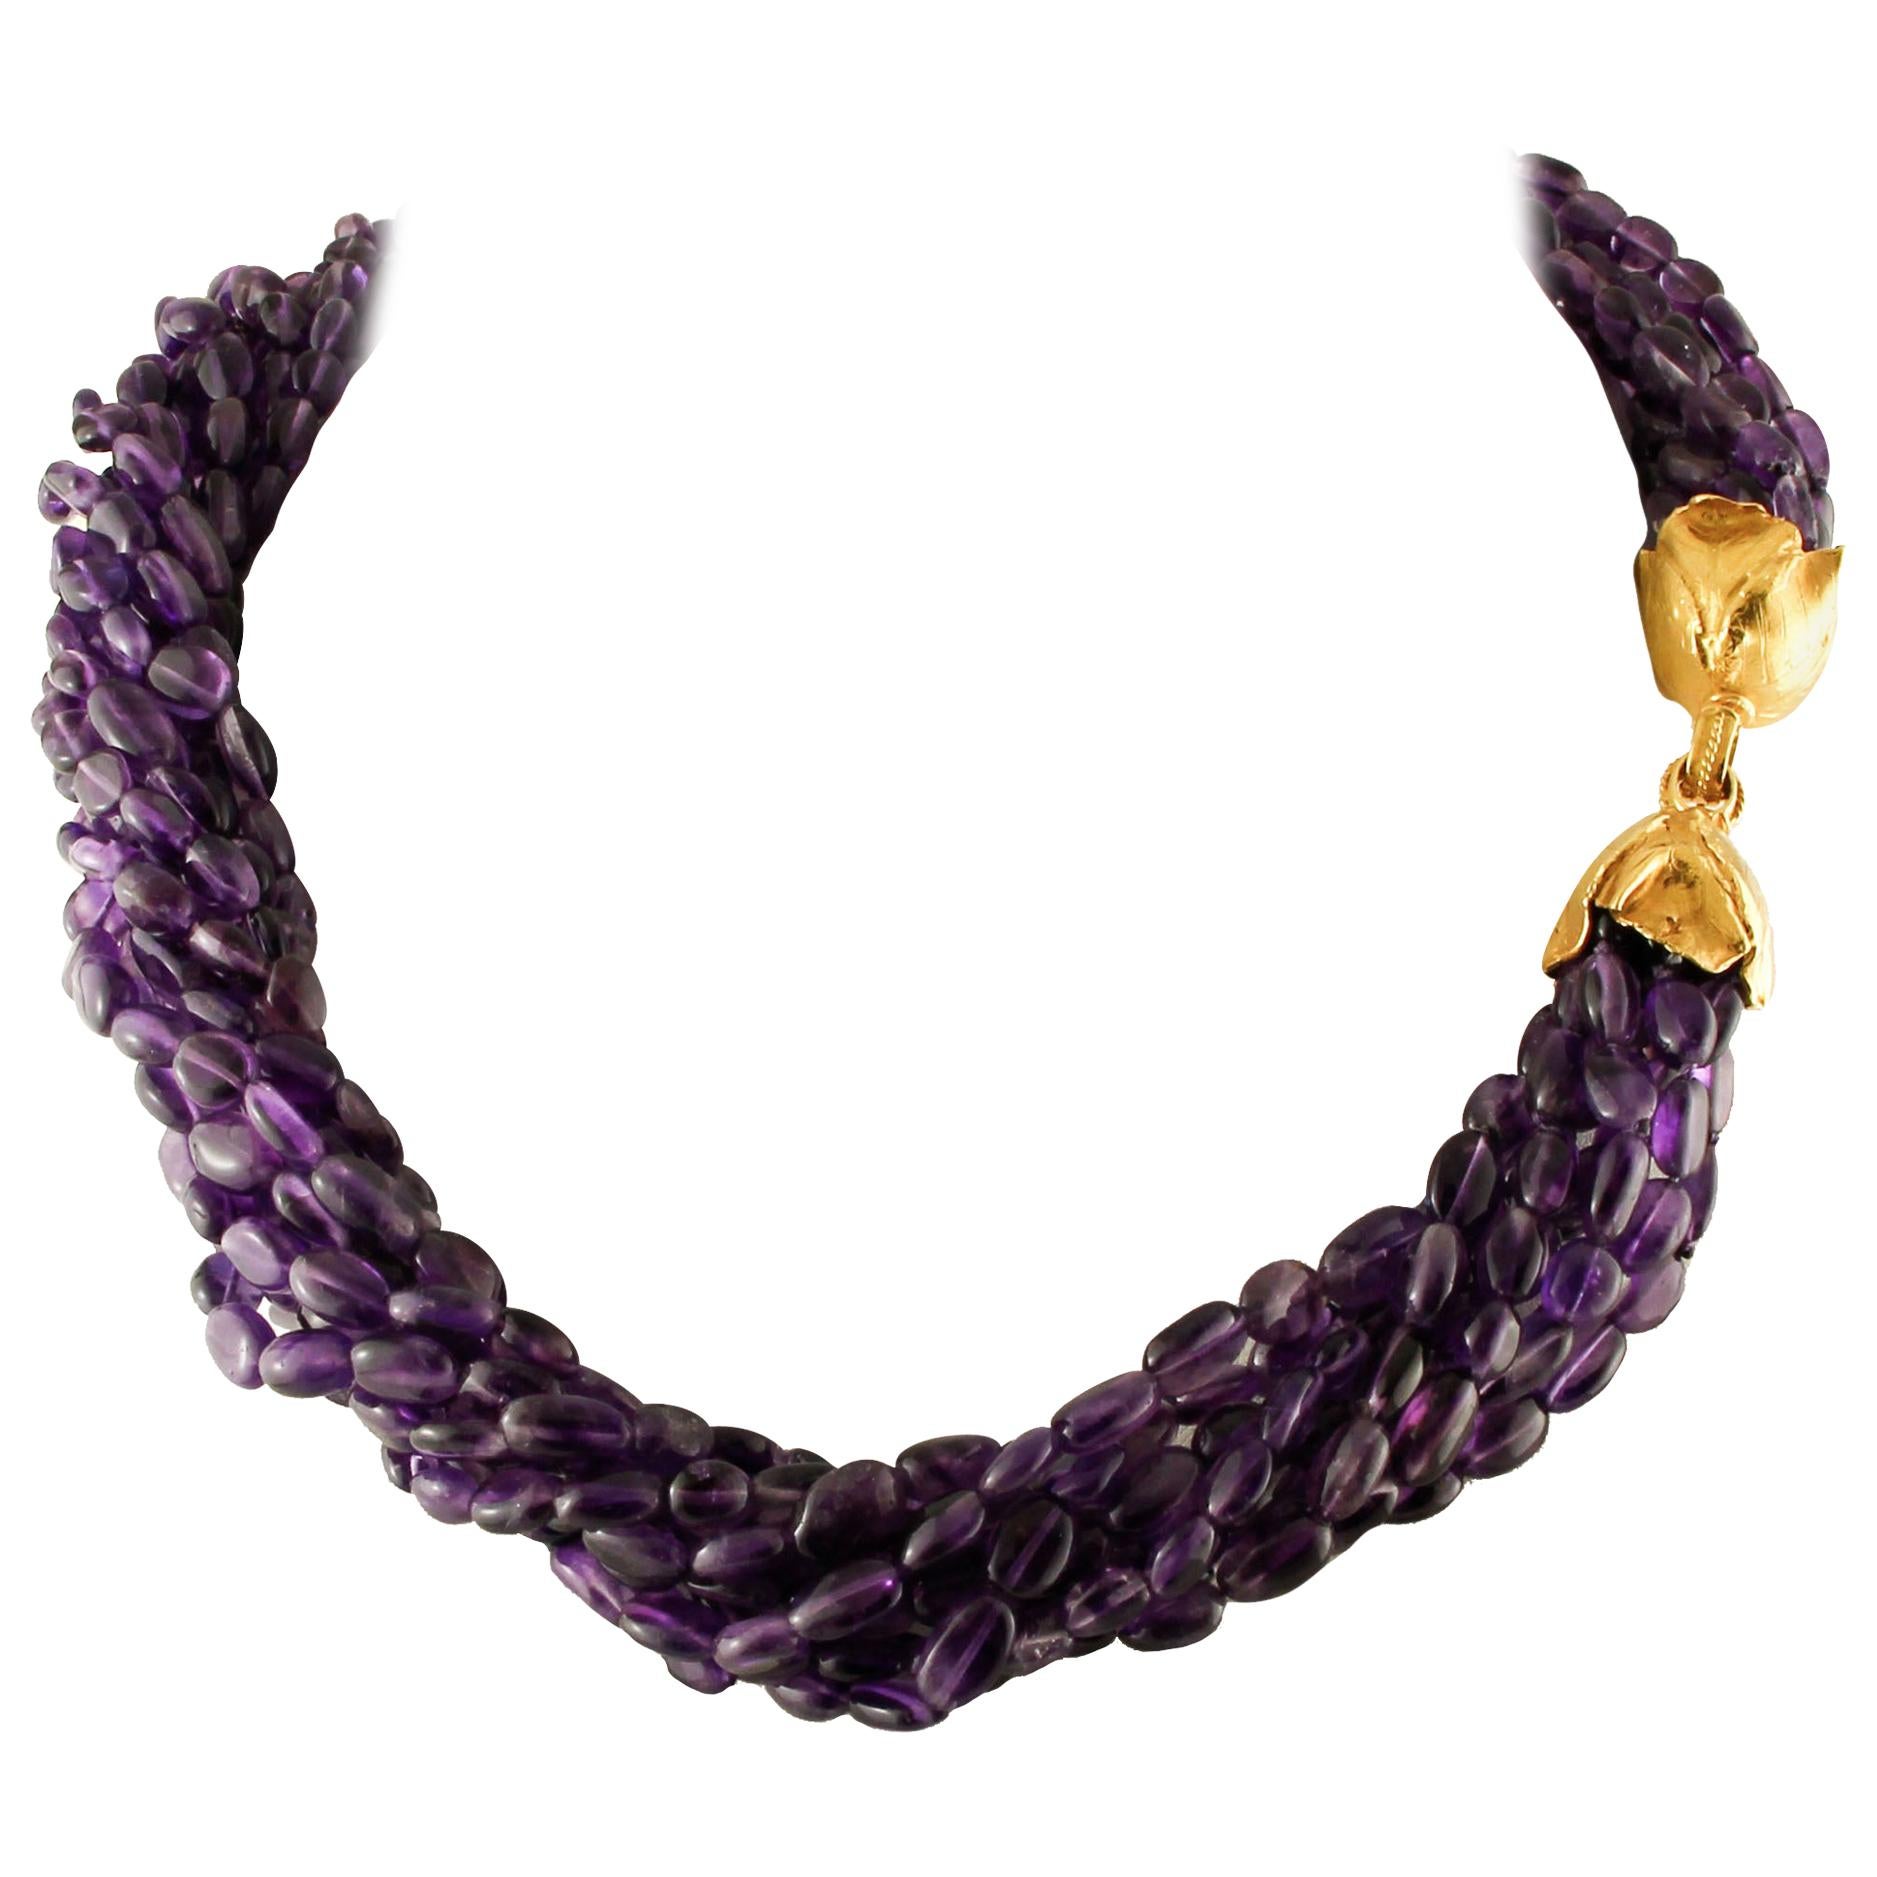 Amethyst Torchon Necklace with 18 Karat Yellow Gold Closure